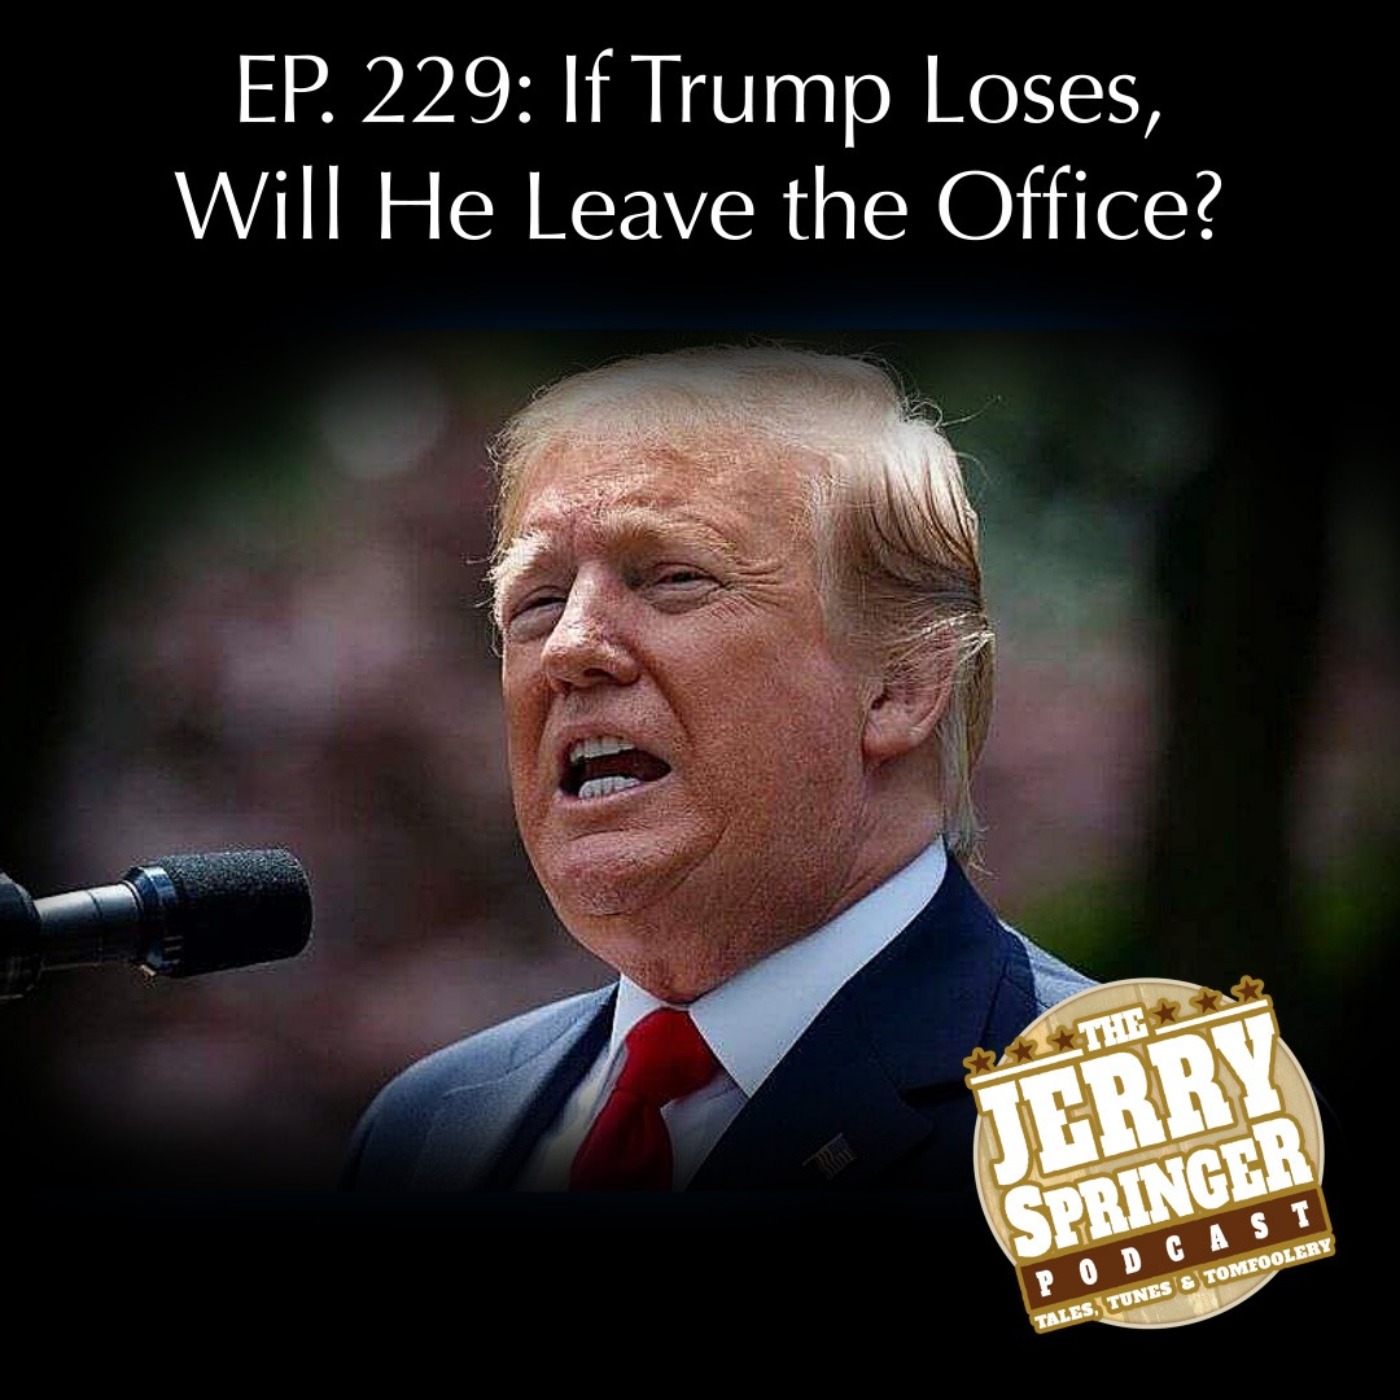 If Trump Loses, Will He Leave the Office? - EP.229